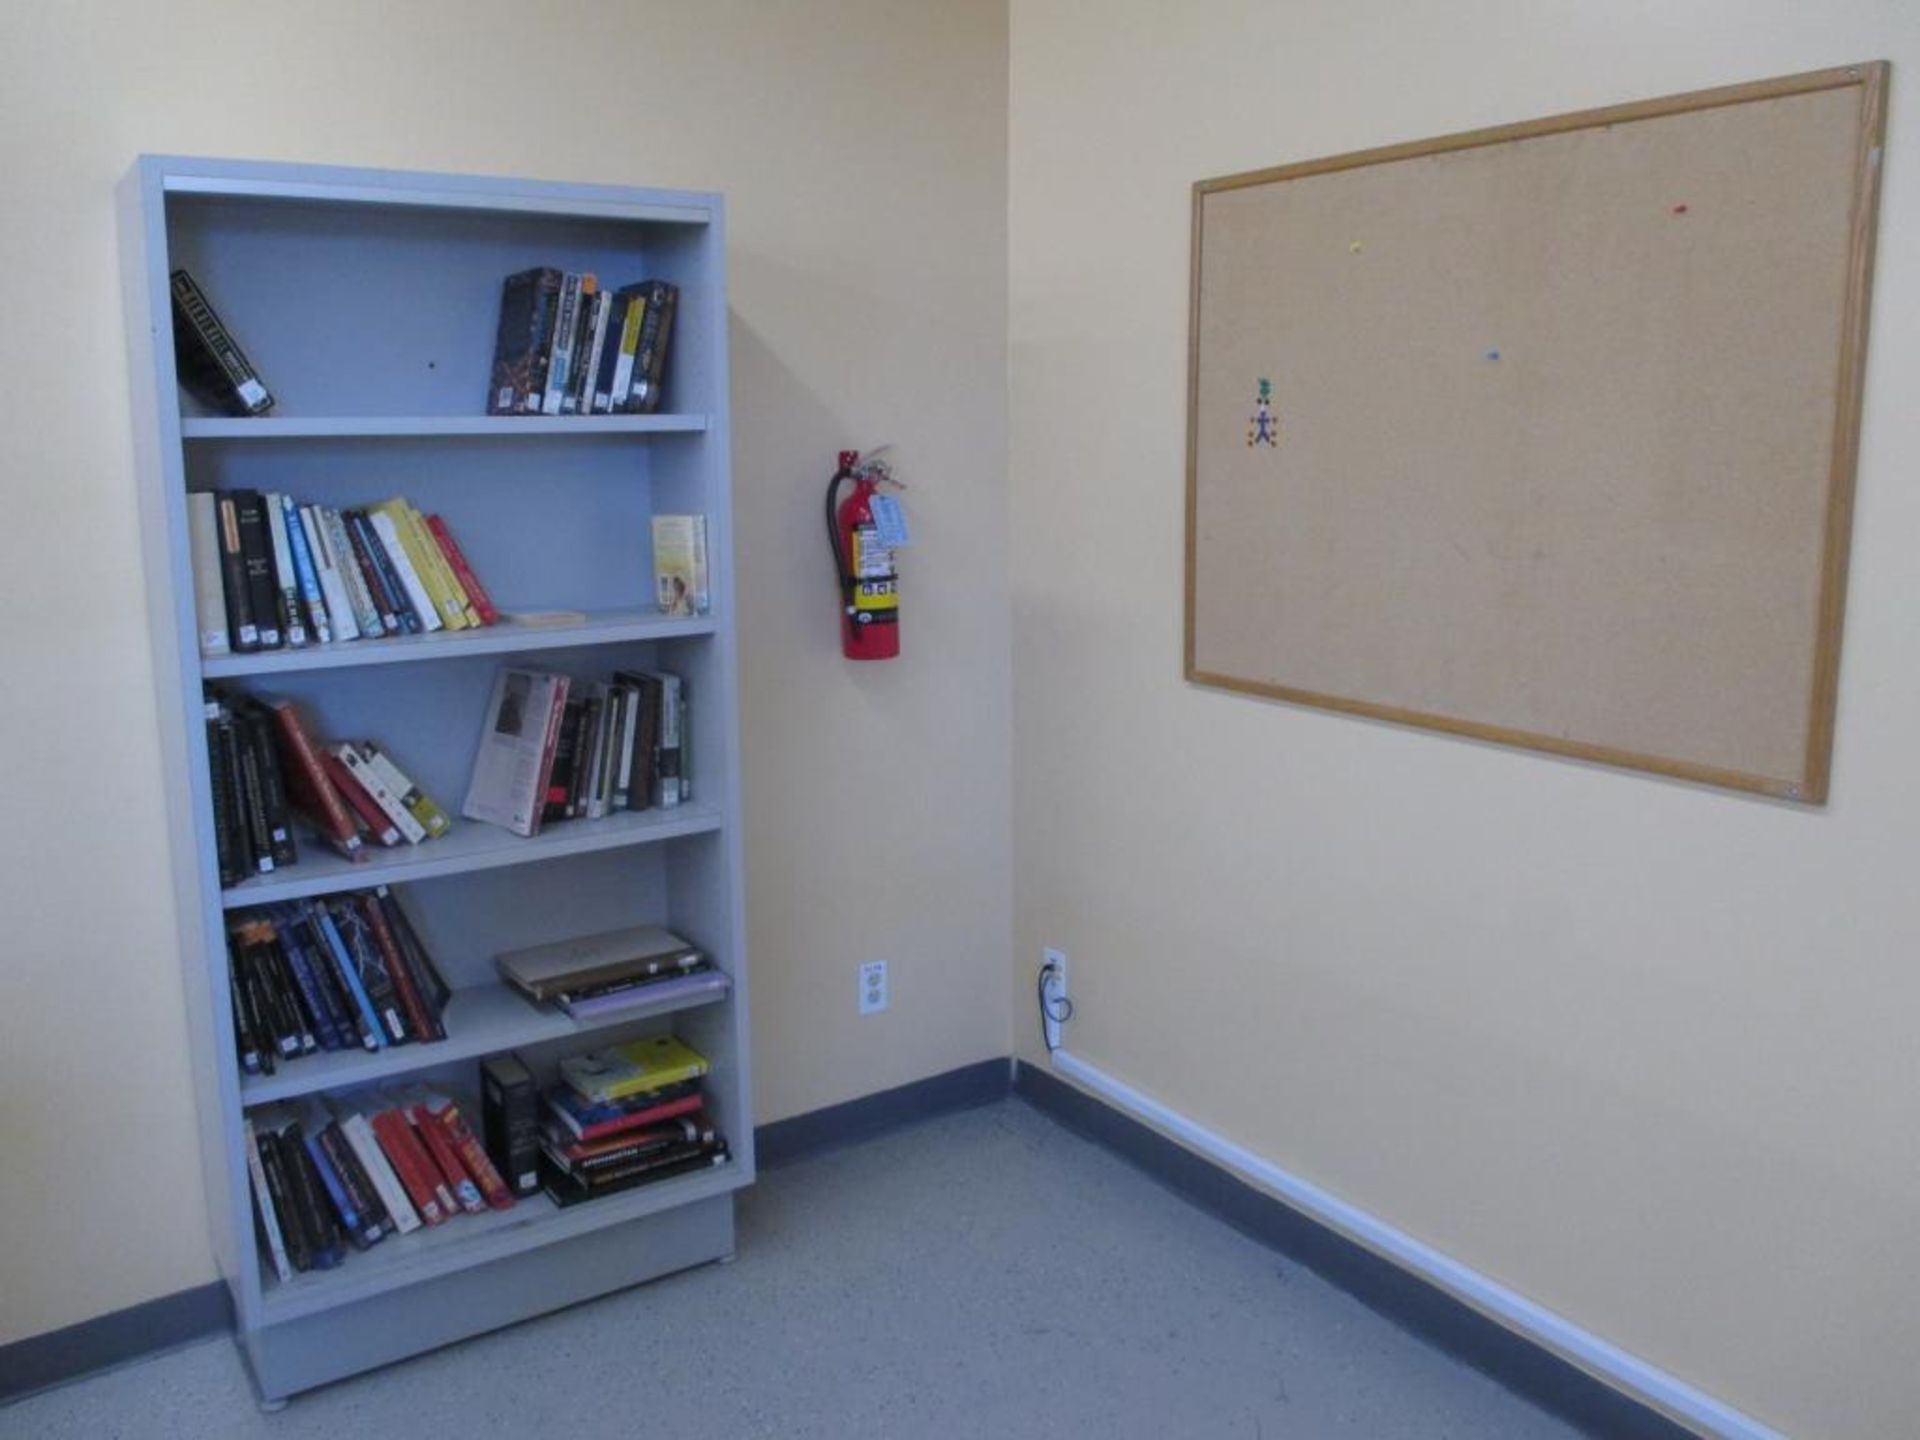 Librarian Furniture and Offices - Image 3 of 13